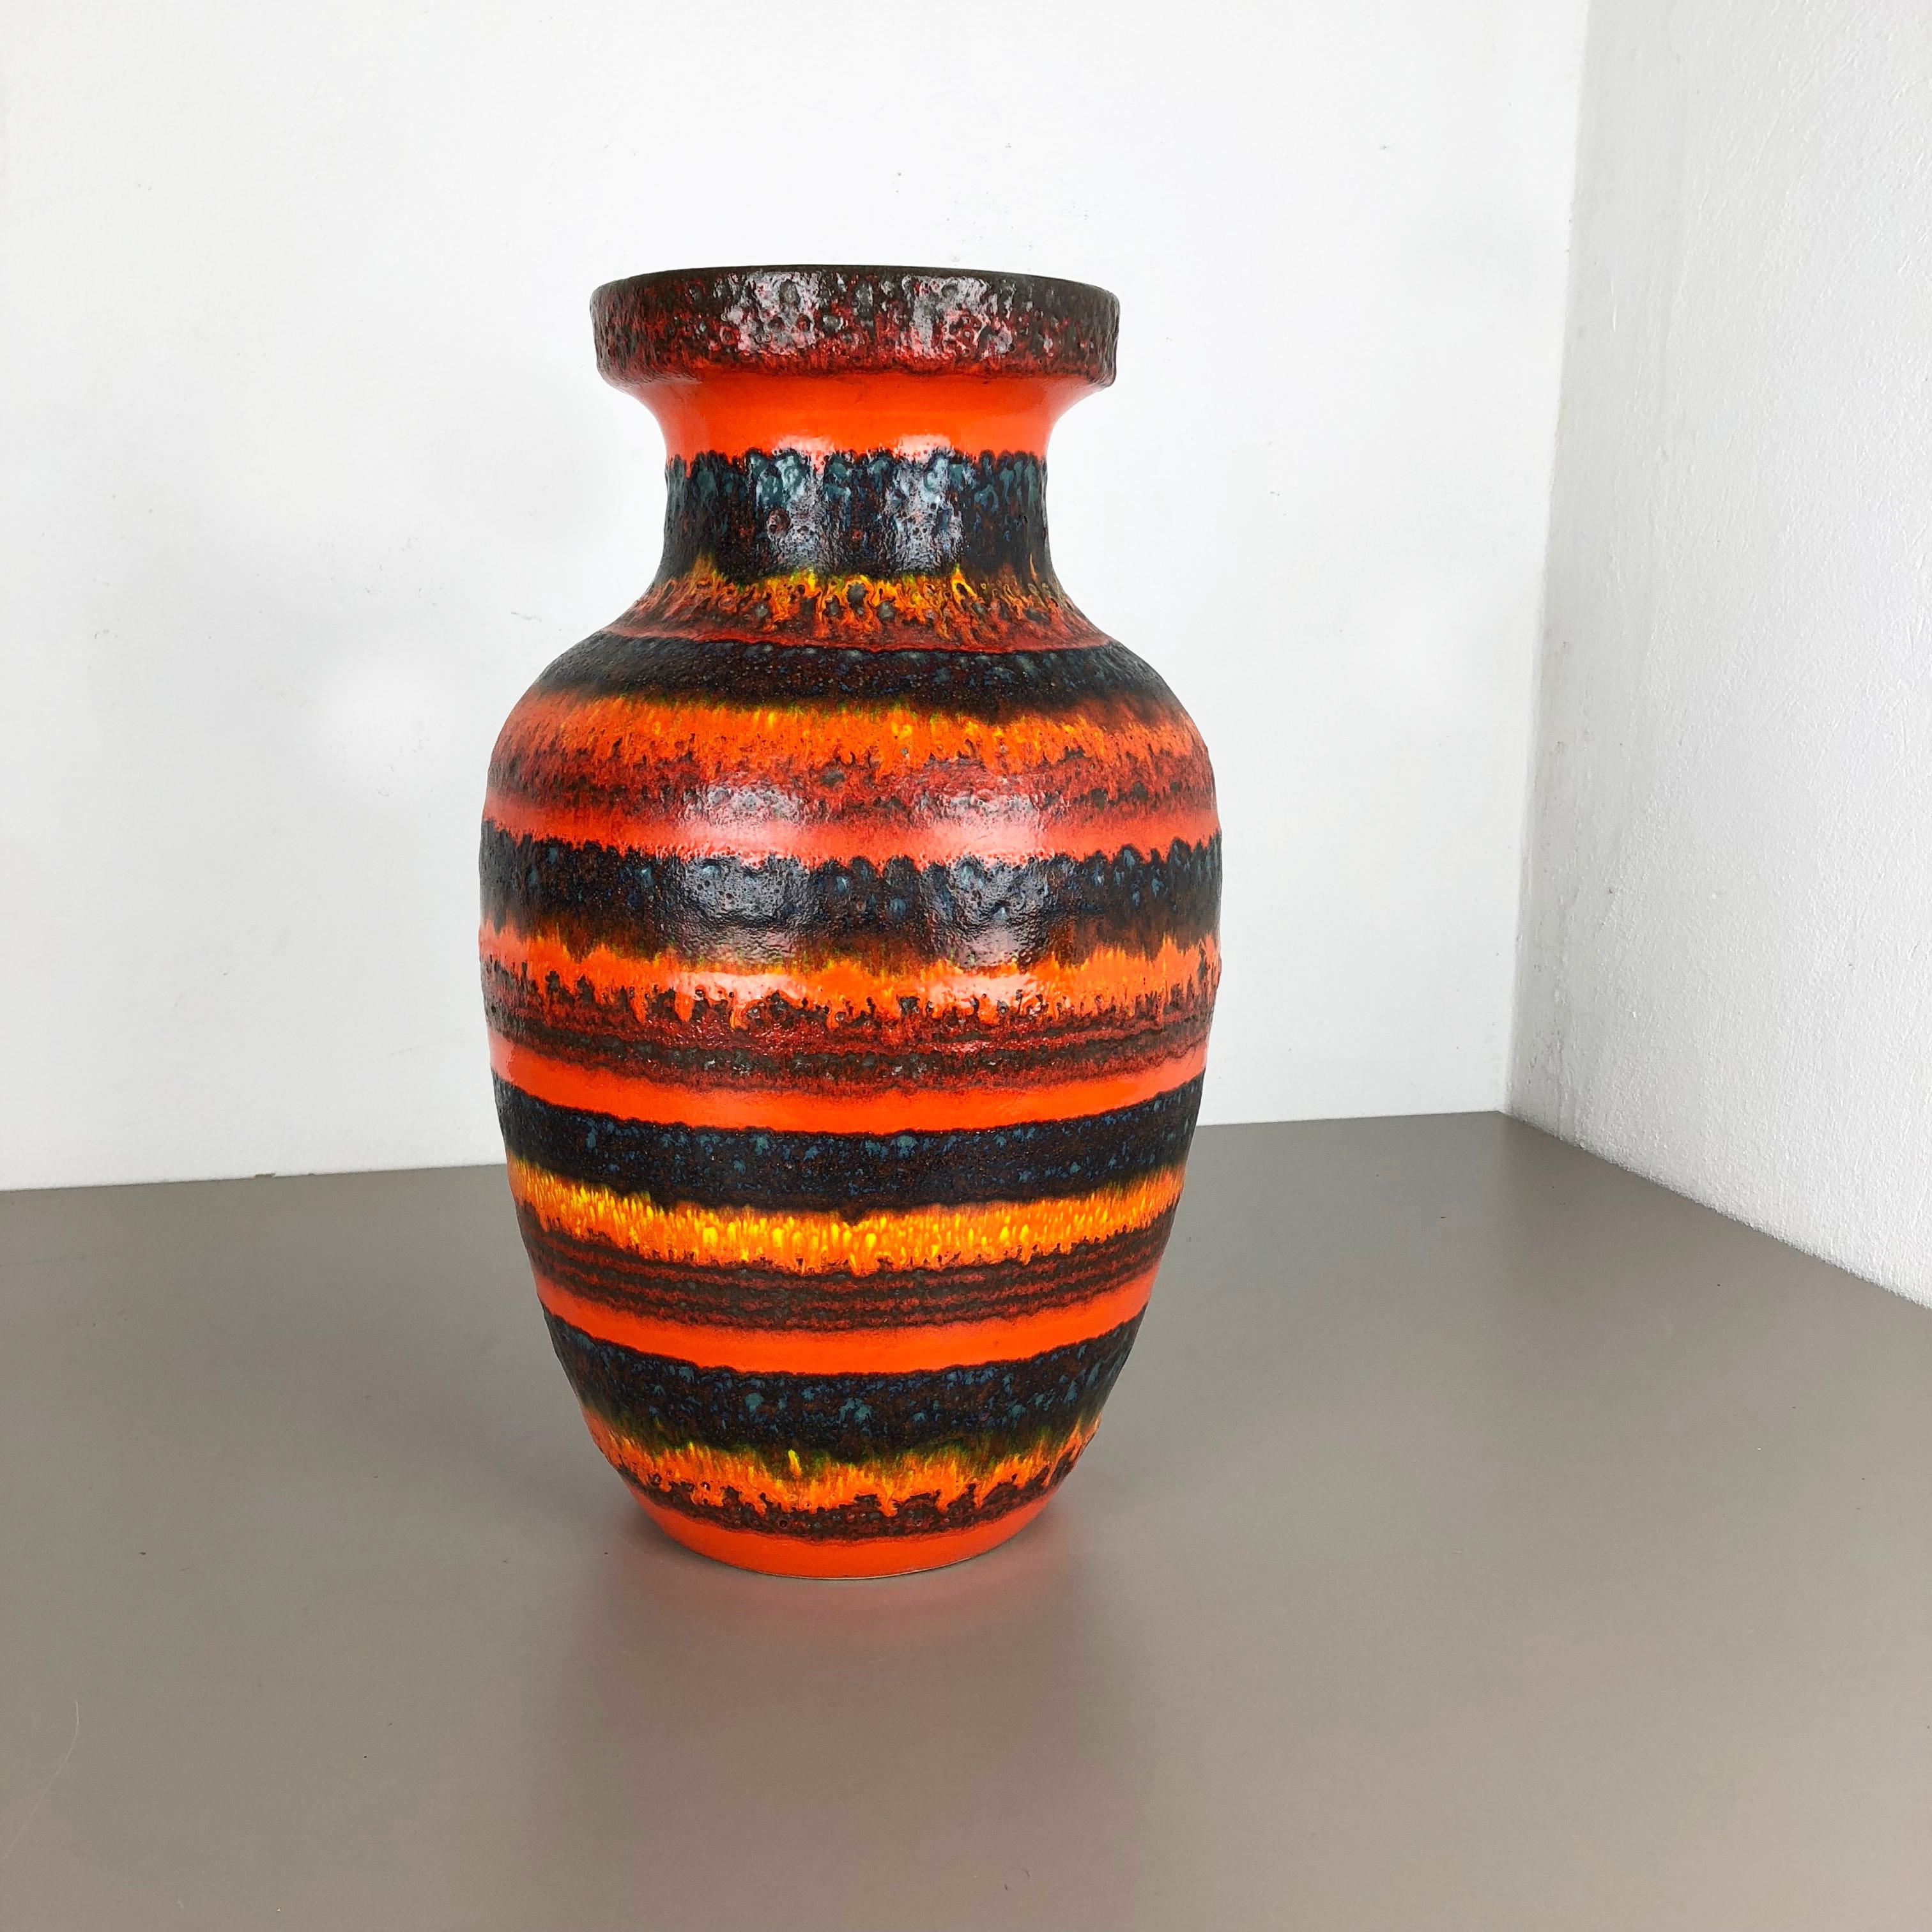 Article:

Fat lava art vase XXXL version



Producer:

Scheurich, Germany



Decade:

1970s


This original vintage vase was produced in the 1970s in Germany. It is made of ceramic pottery in fat lava optic with abstract